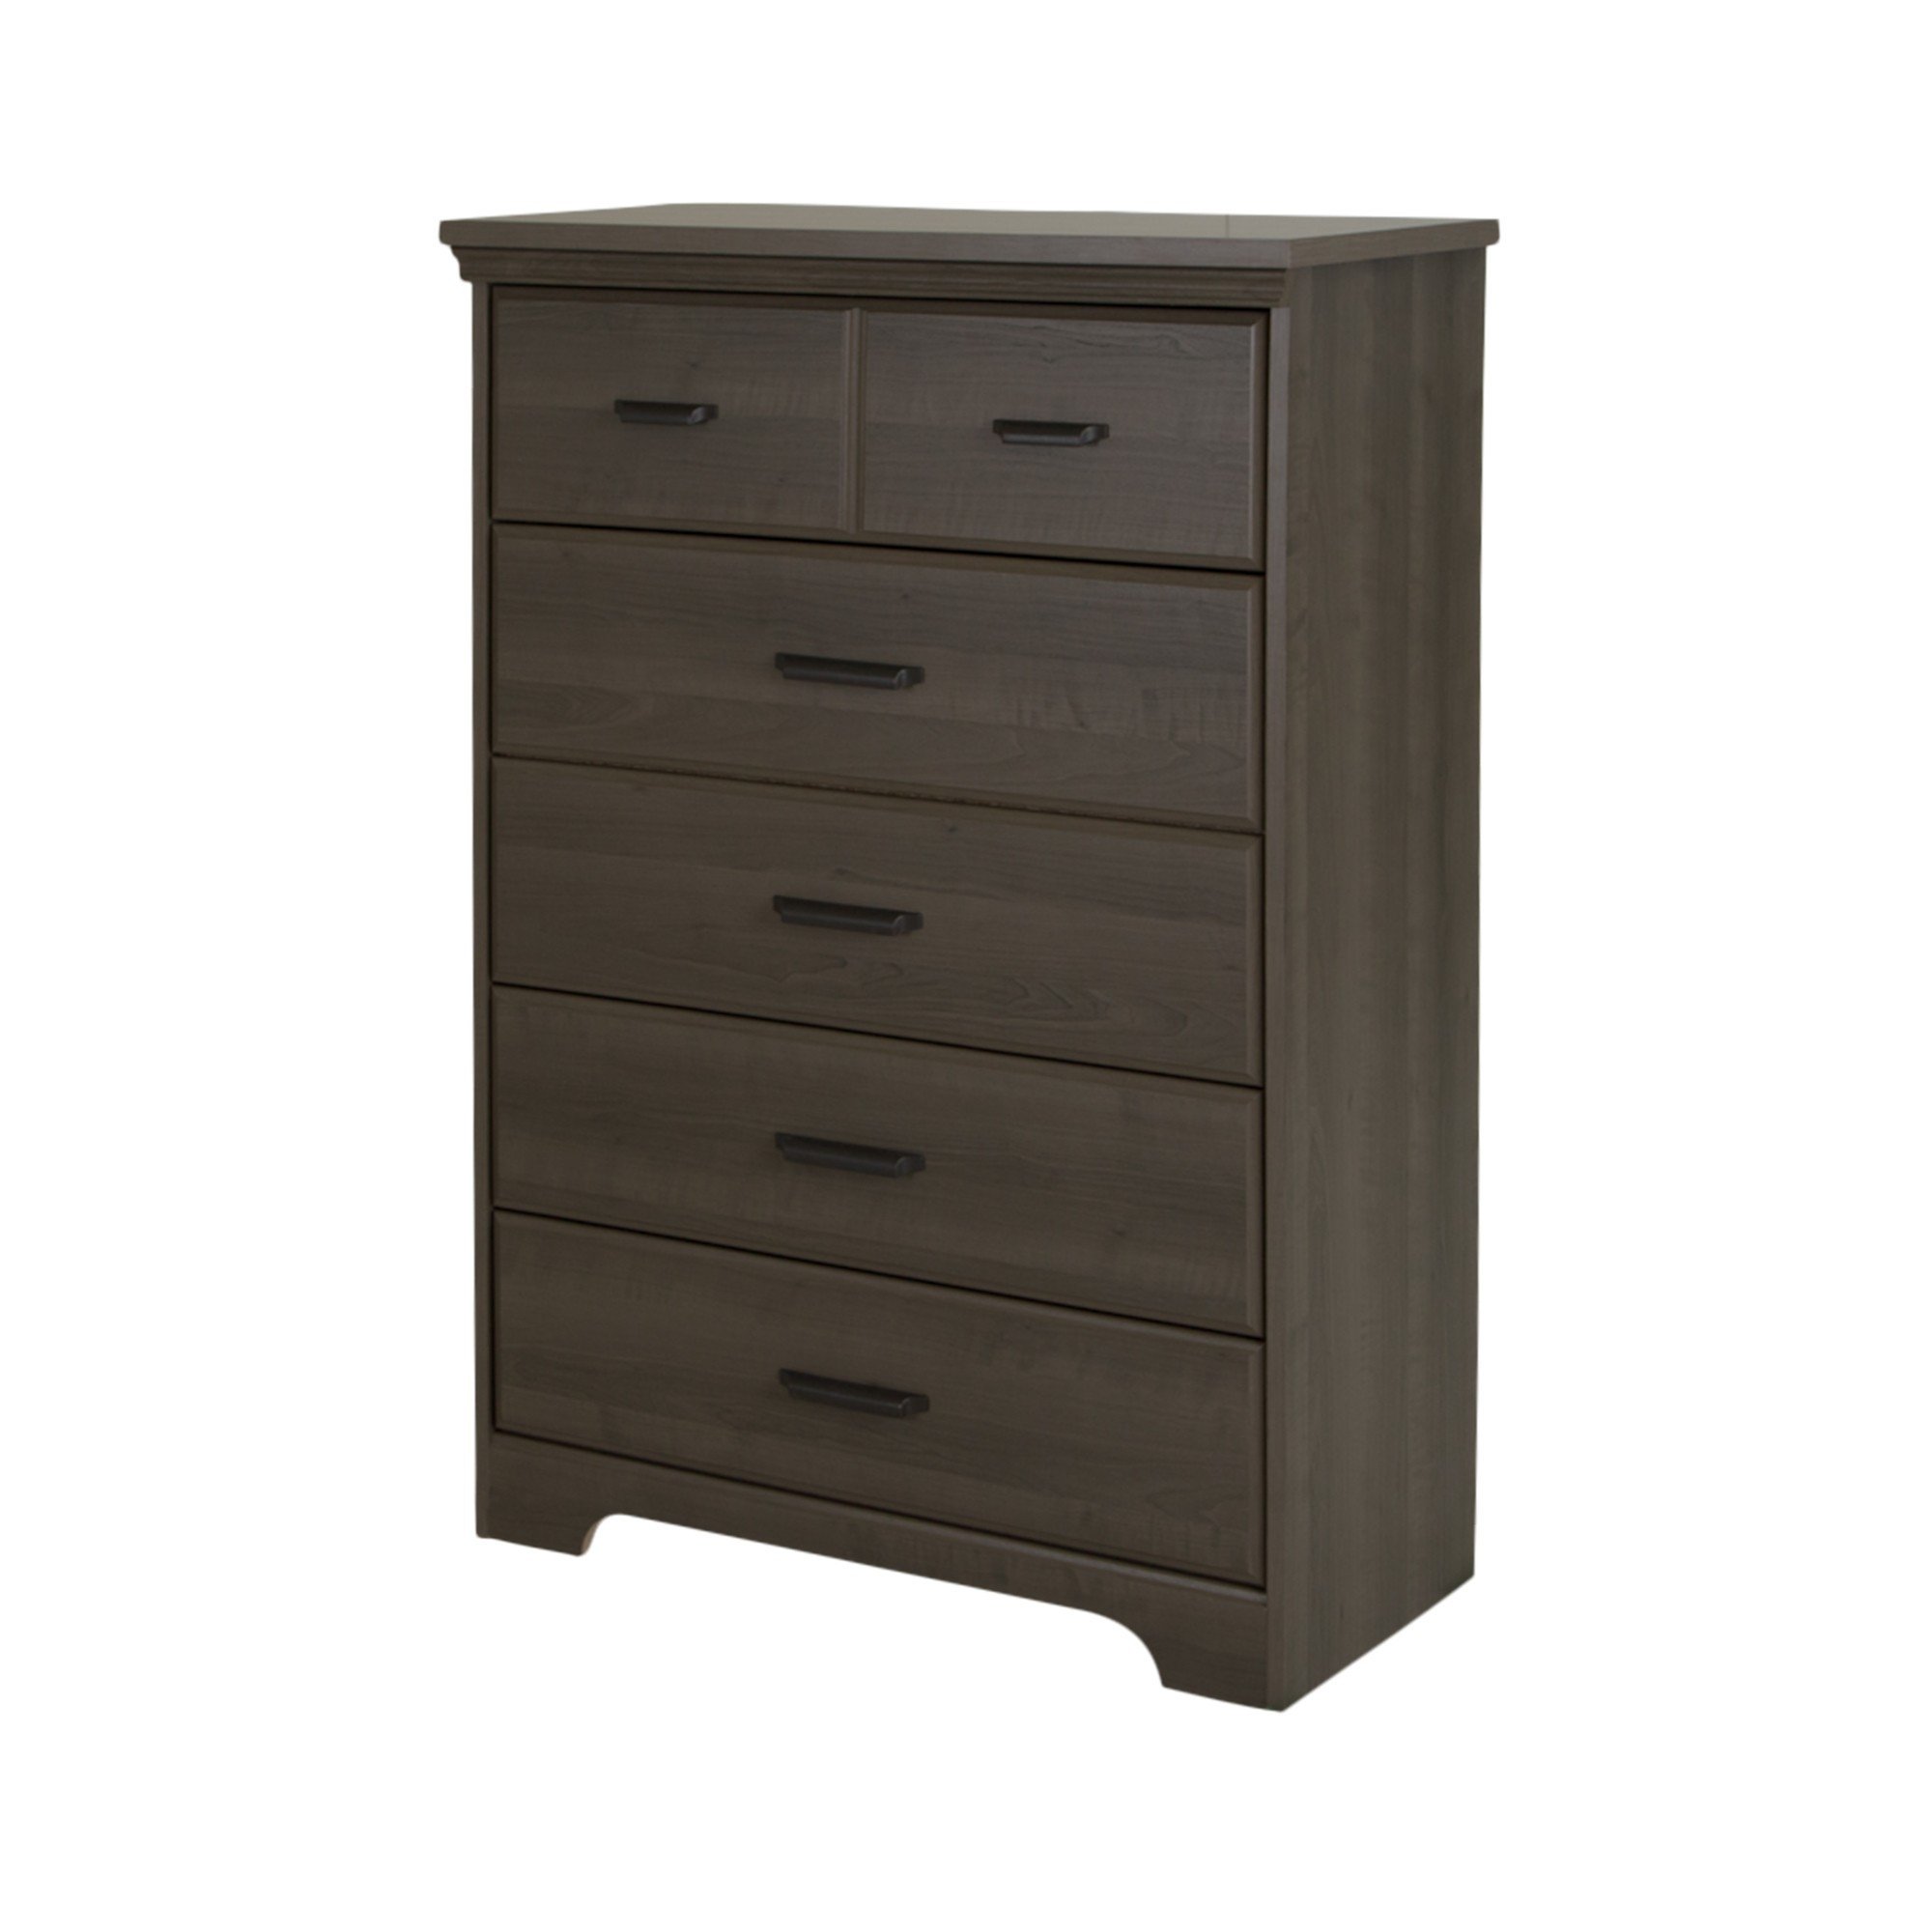 Bedroom Dressers and Chests Luxury Versa 5 Drawer Chest Gray Maple south Shore Grey